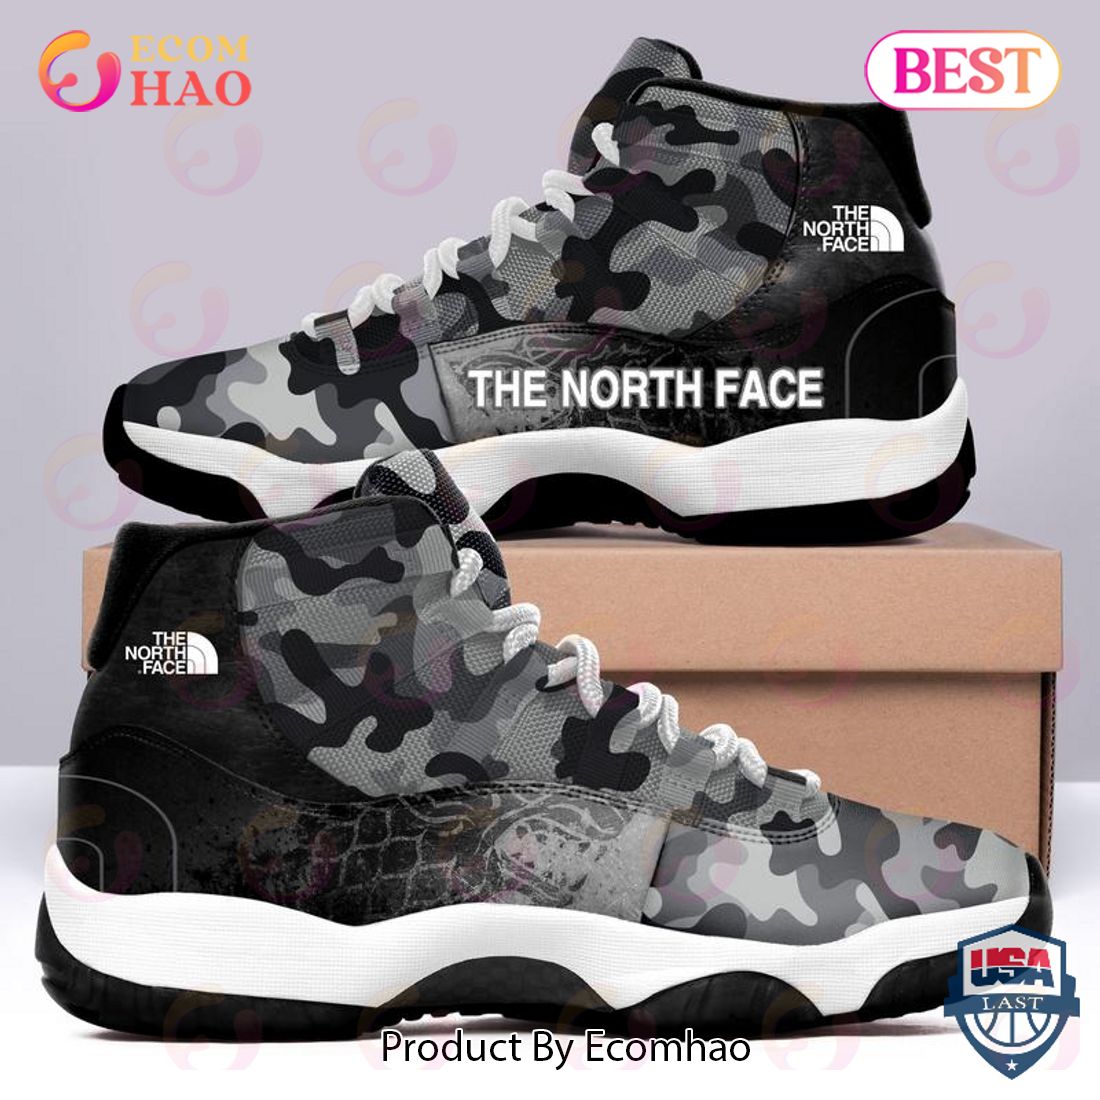 The North Face Camouflage Air Jordan 11 Sneaker